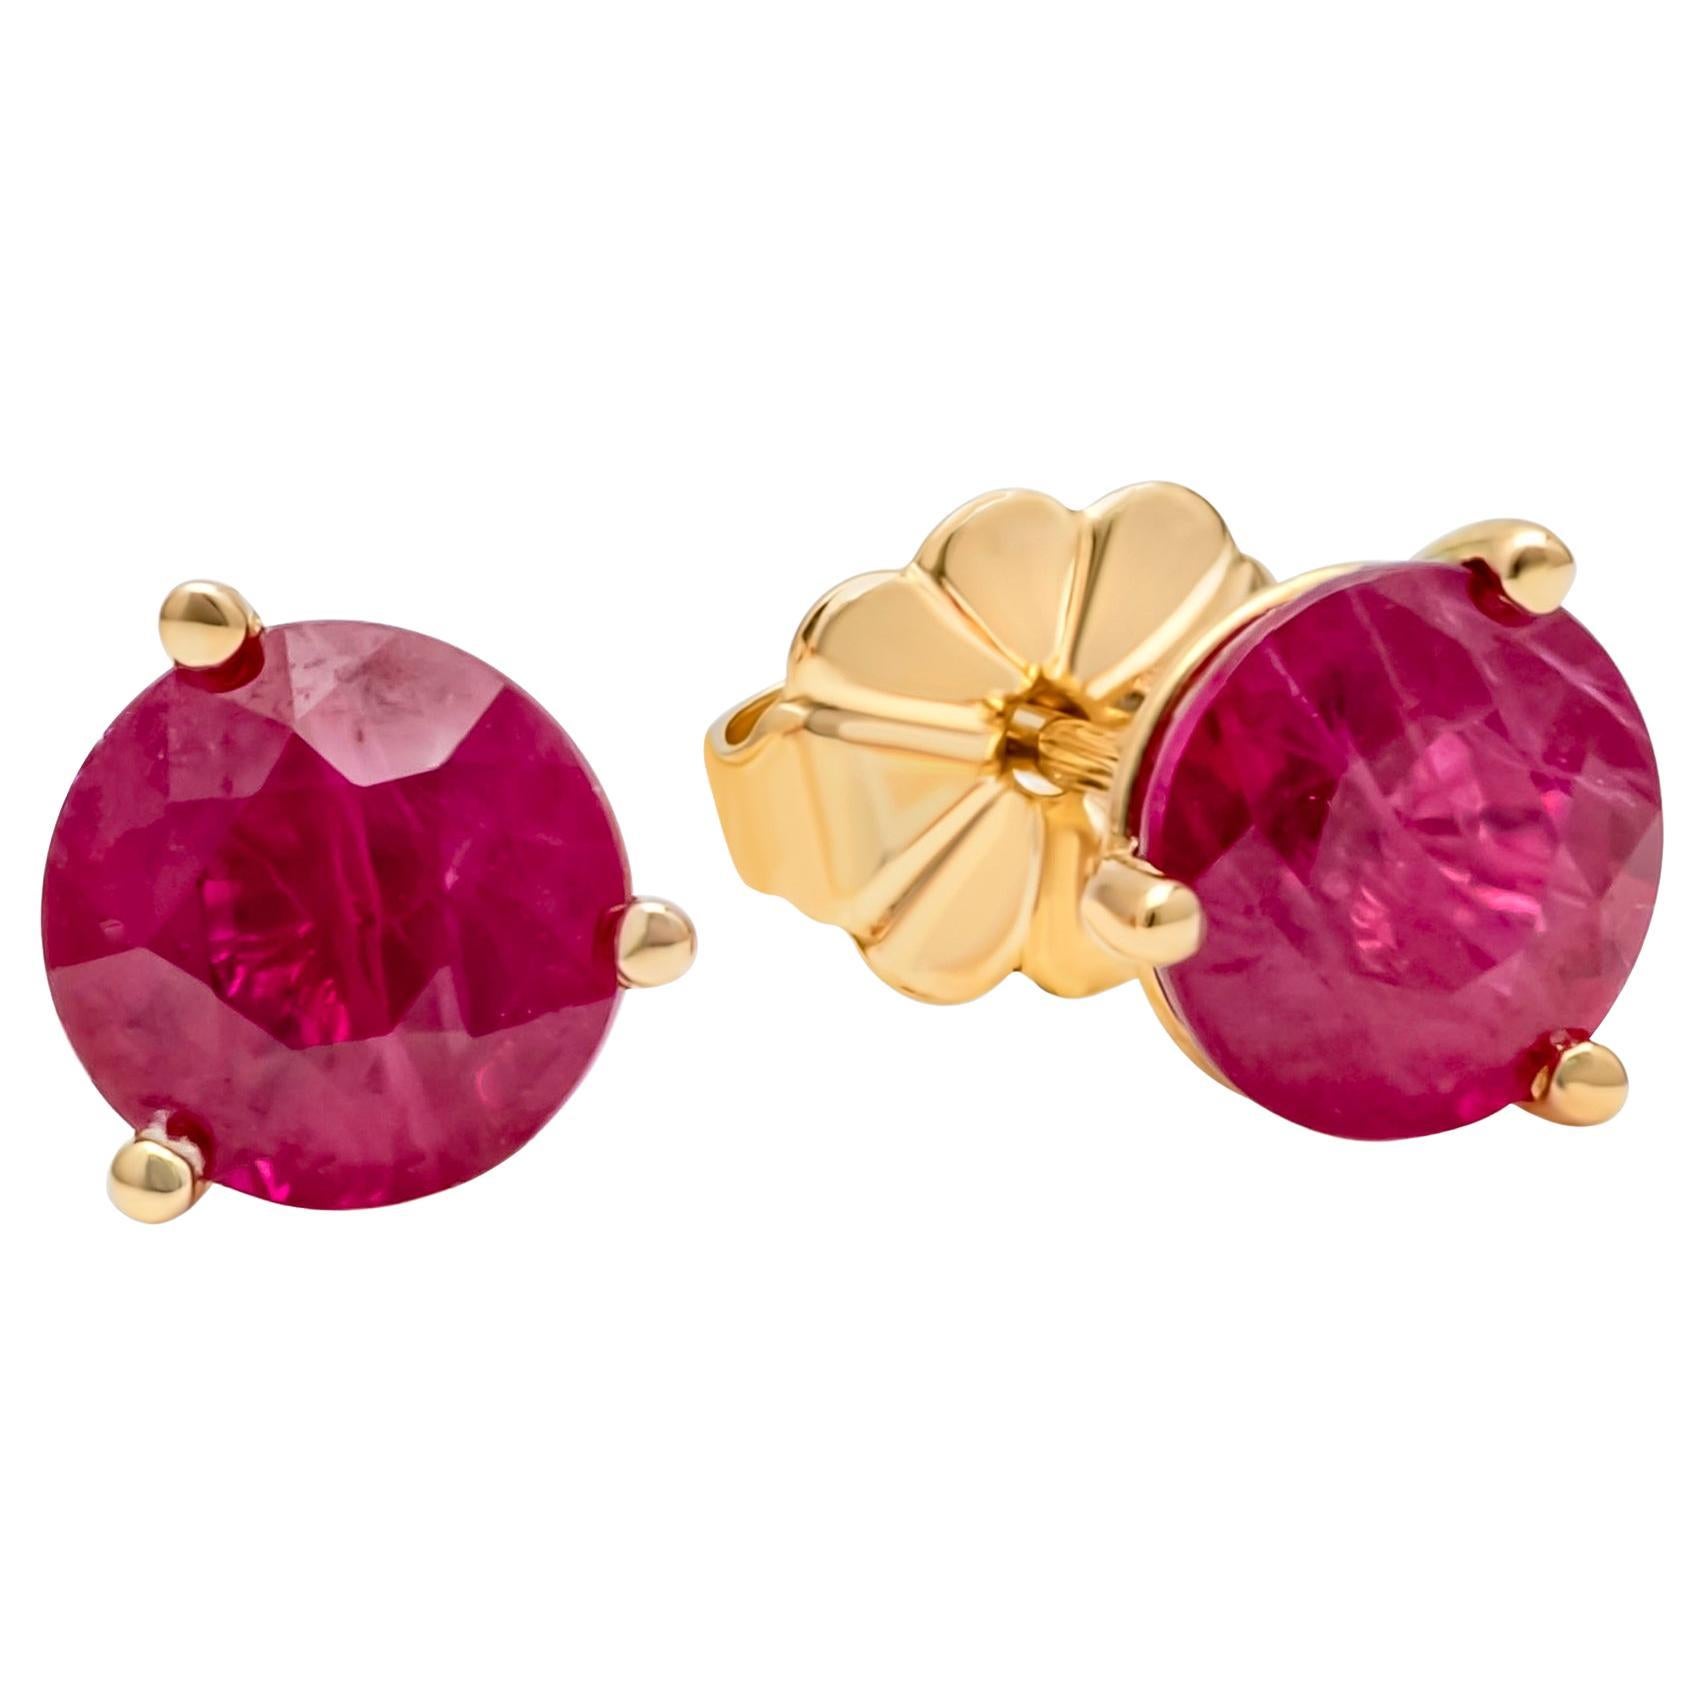 2.10 Carats Total Brilliant Round Shape Burmese Ruby Stud Earrings For Sale